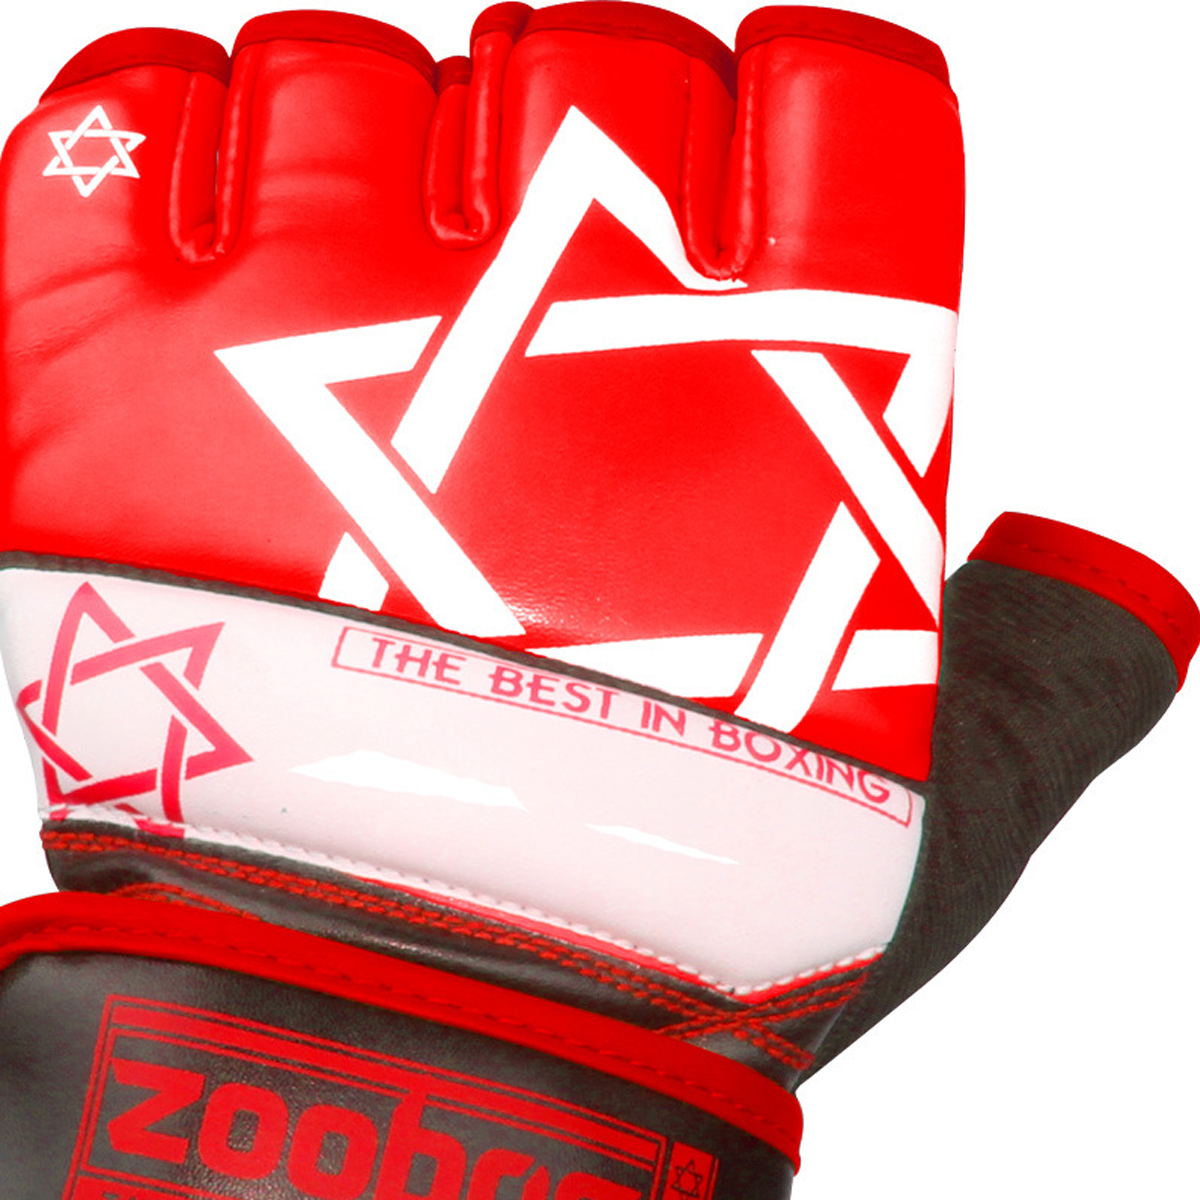 ZOOBOO-Boxing-Gloves-Training-Gloves-Sparring-Mitts-Slimming--Exercising-Boxing-Gloves-1637308-4